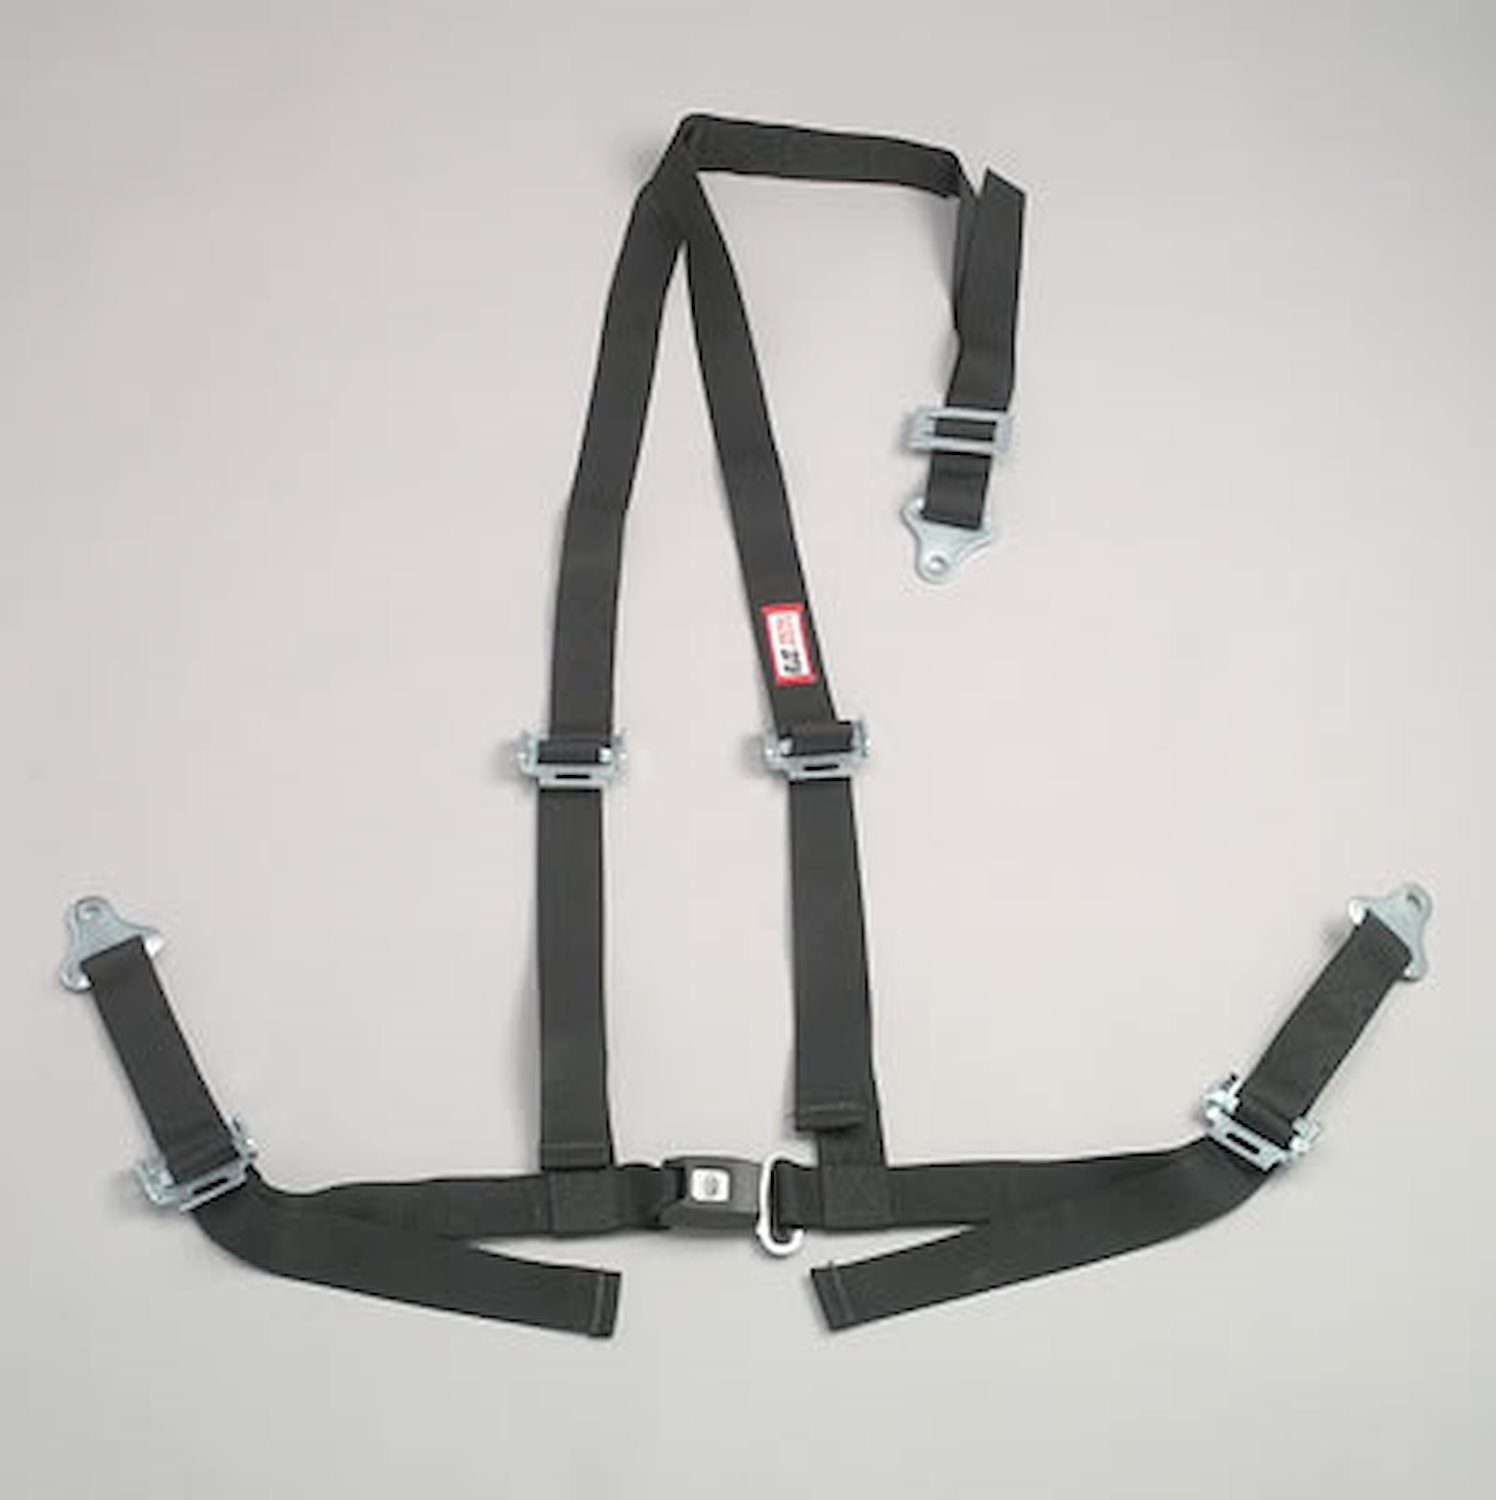 NON-SFI B&T HARNESS 2 PULL DOWN Lap Belt 2 S. H. V ROLL BAR Mount ALL SNAP ENDS w/STERNUM STRAP BLACK